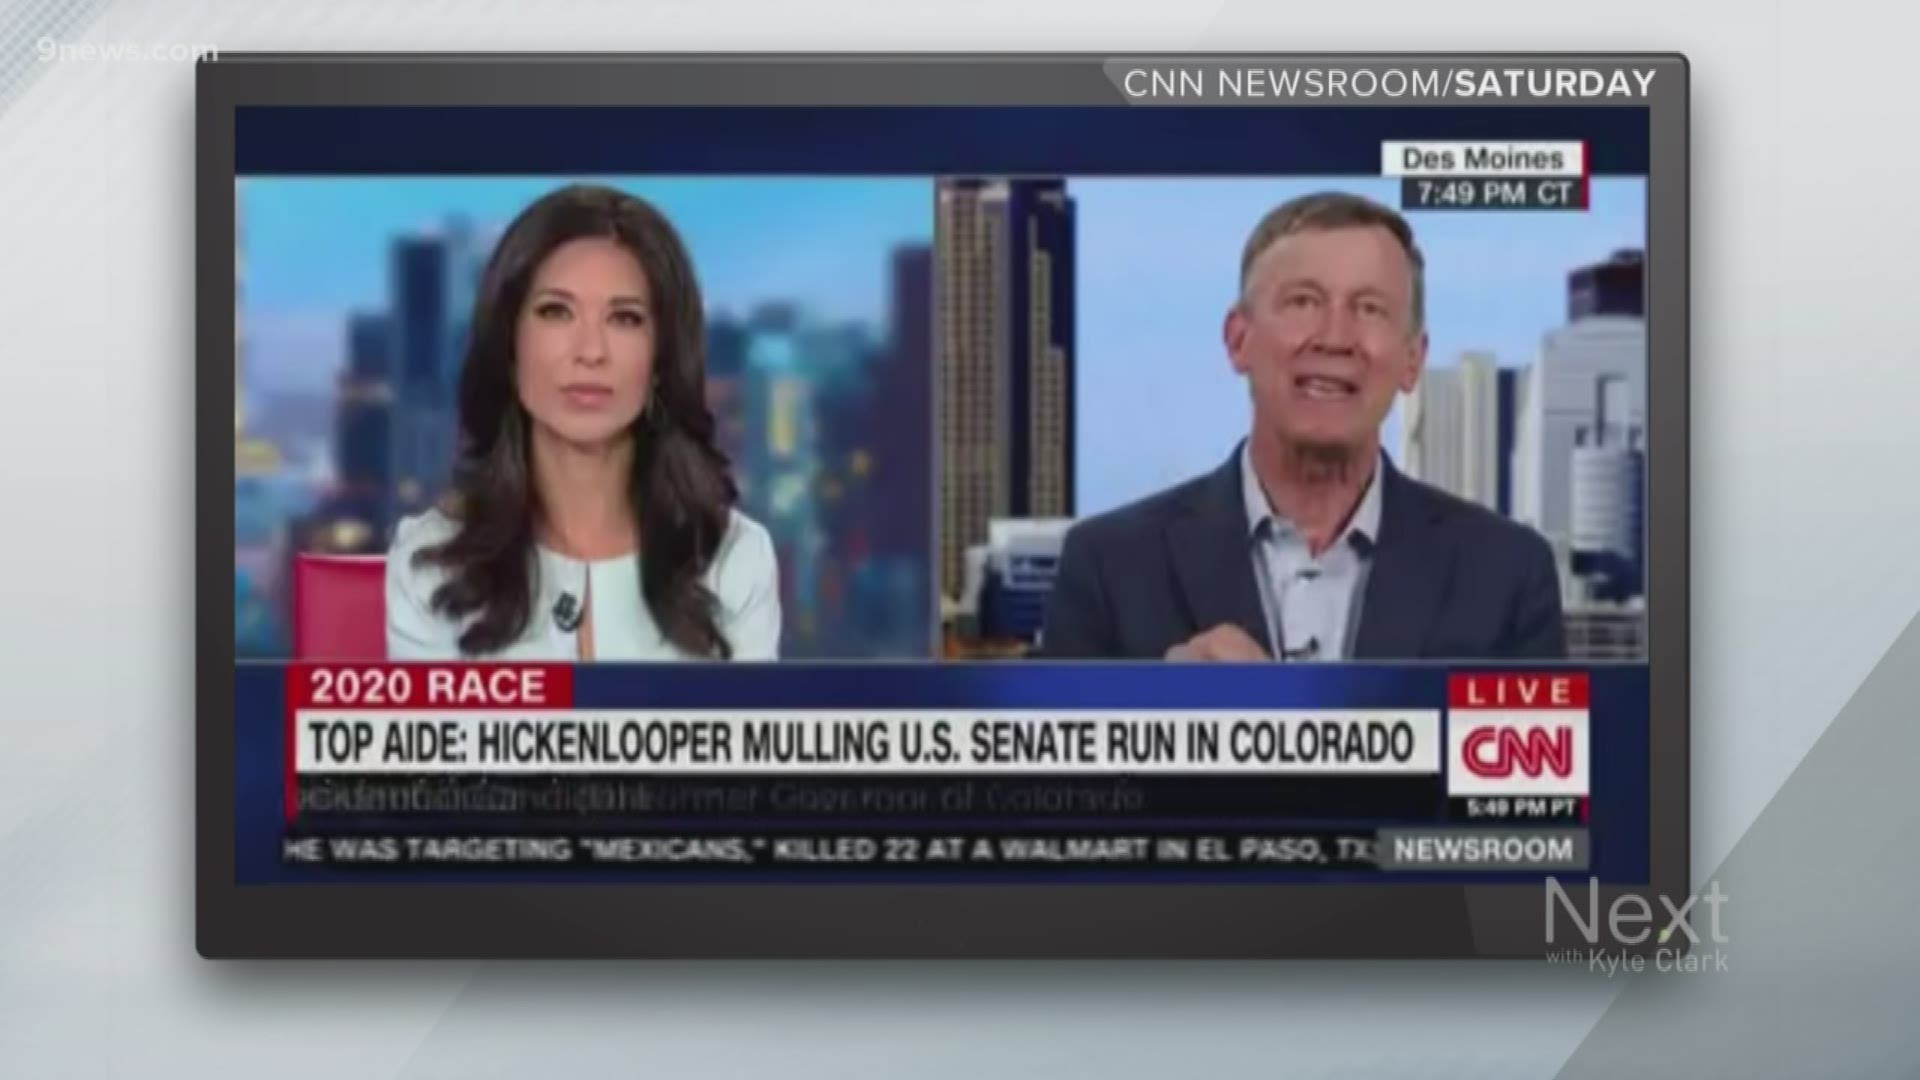 The trivia answer is 164 days - former Colorado Governor John Hickenlooper's presidential campaign lasted 164 days. Marshall Zelinger breaks down what Hickenlooper has said about running for Senate.